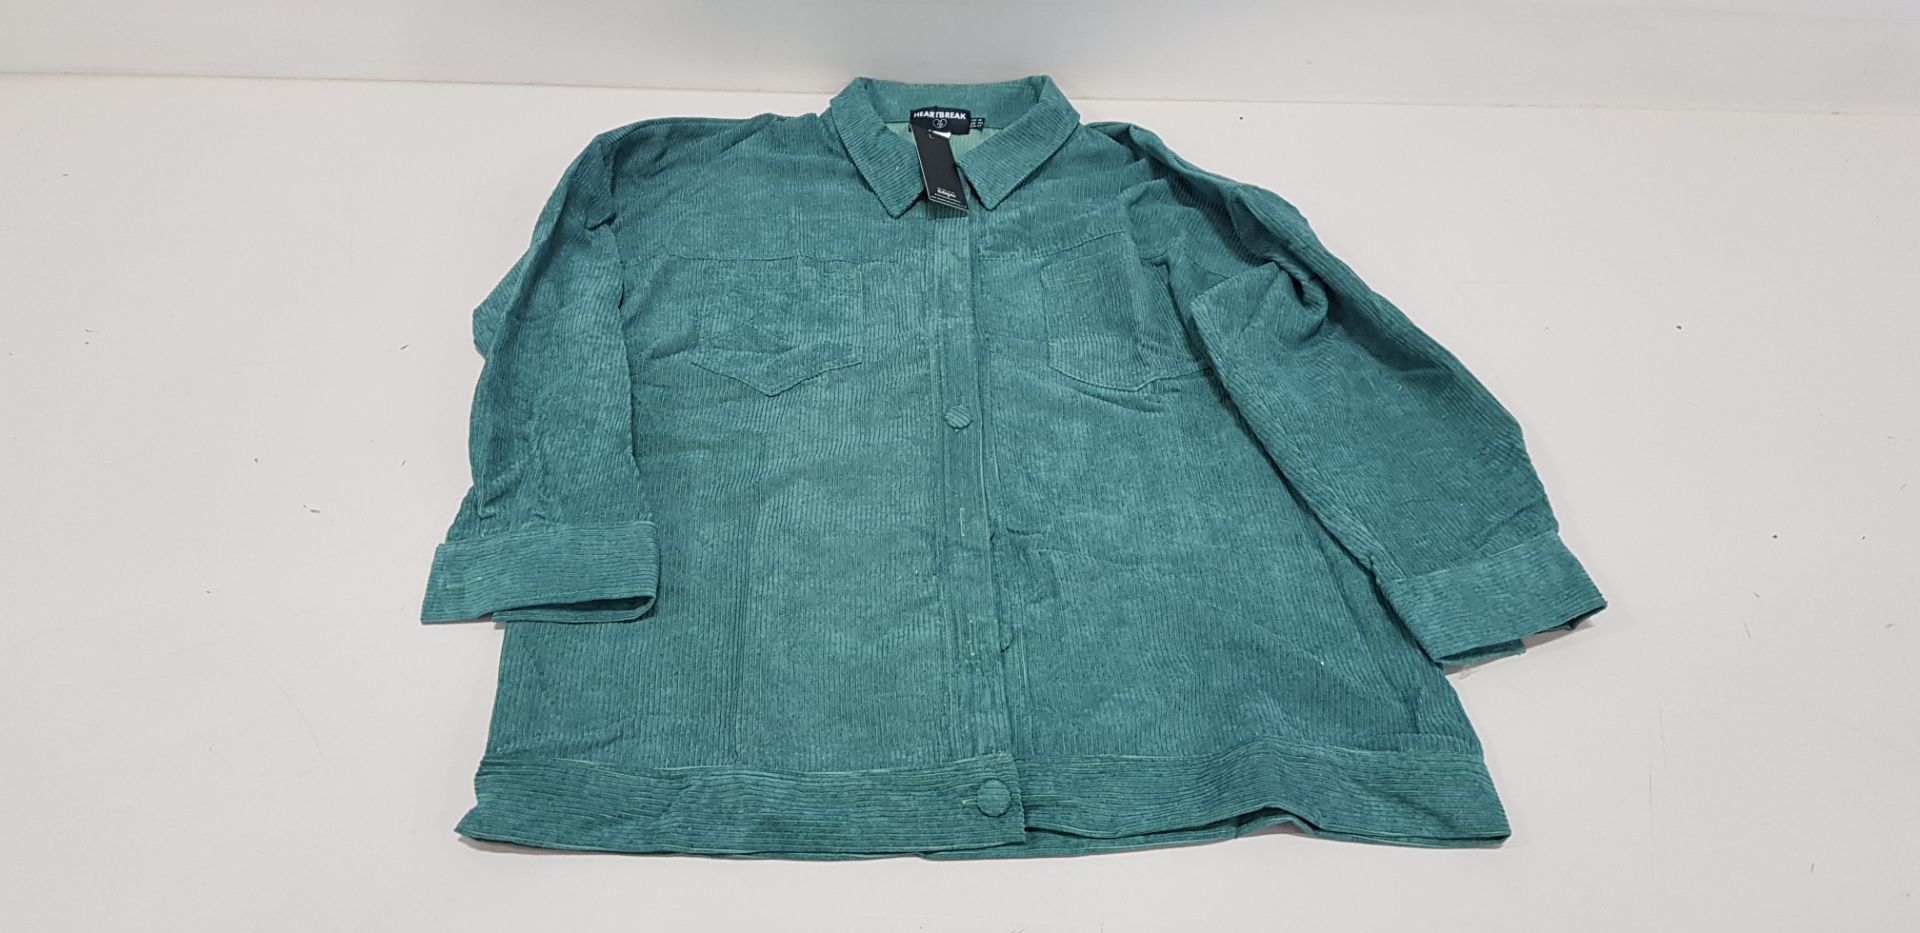 22 X BRAND NEW HEARTBREAK CORD SHIRT IN FOREST GREEN (SIZES 14 AND 16) - IN 2 TRAYS